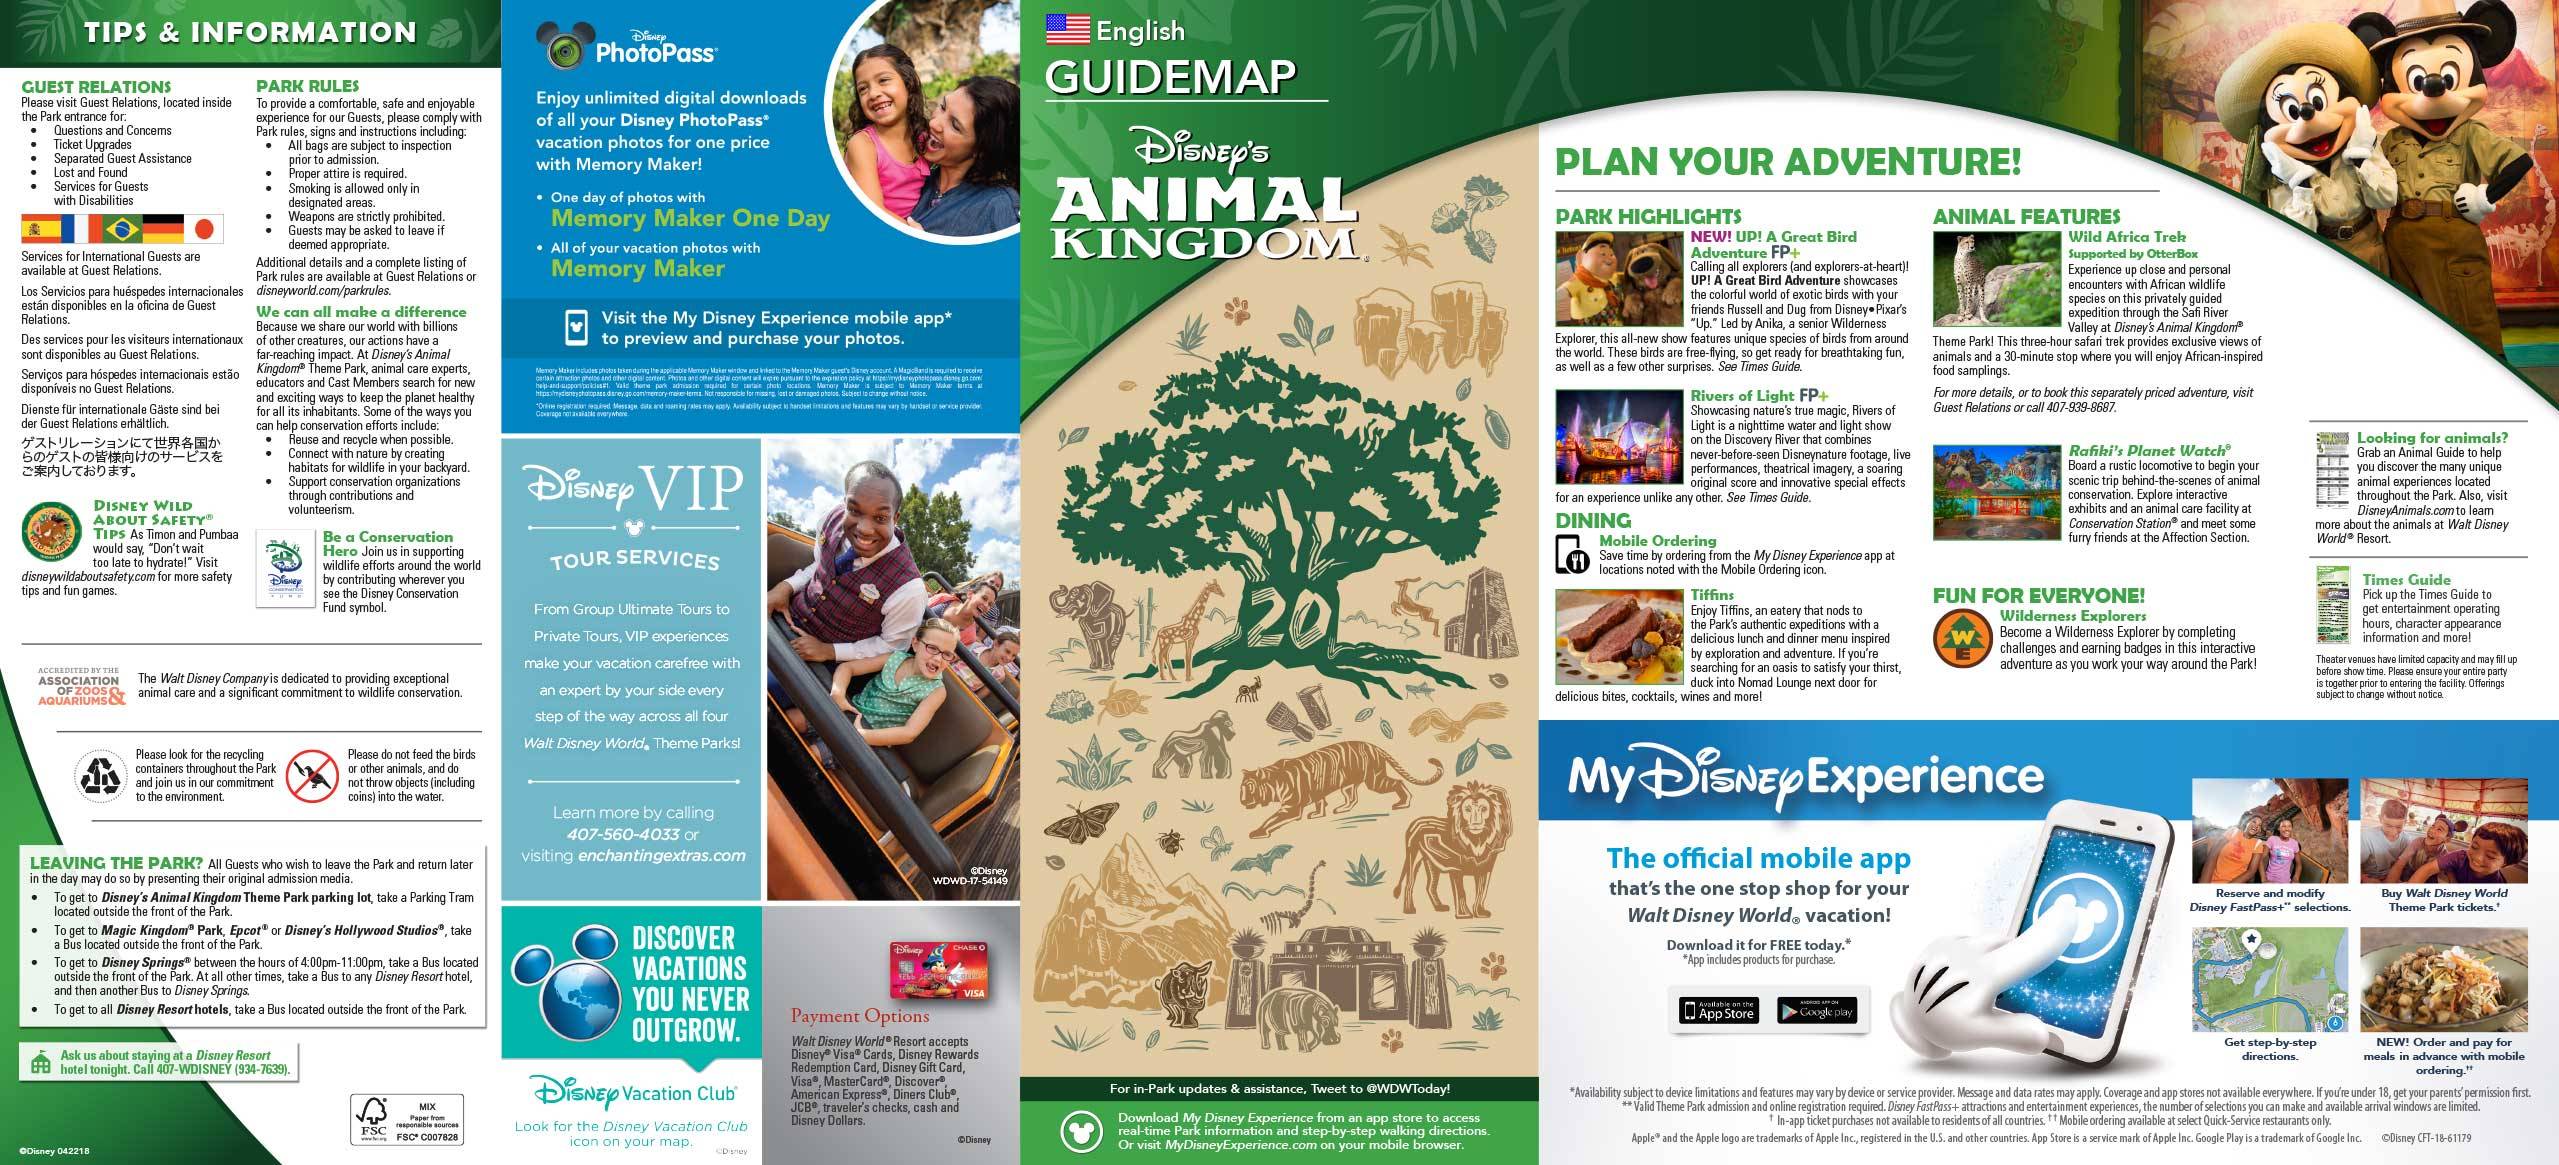 Disney's Animal Kingdom 20th Anniversary guide map - front